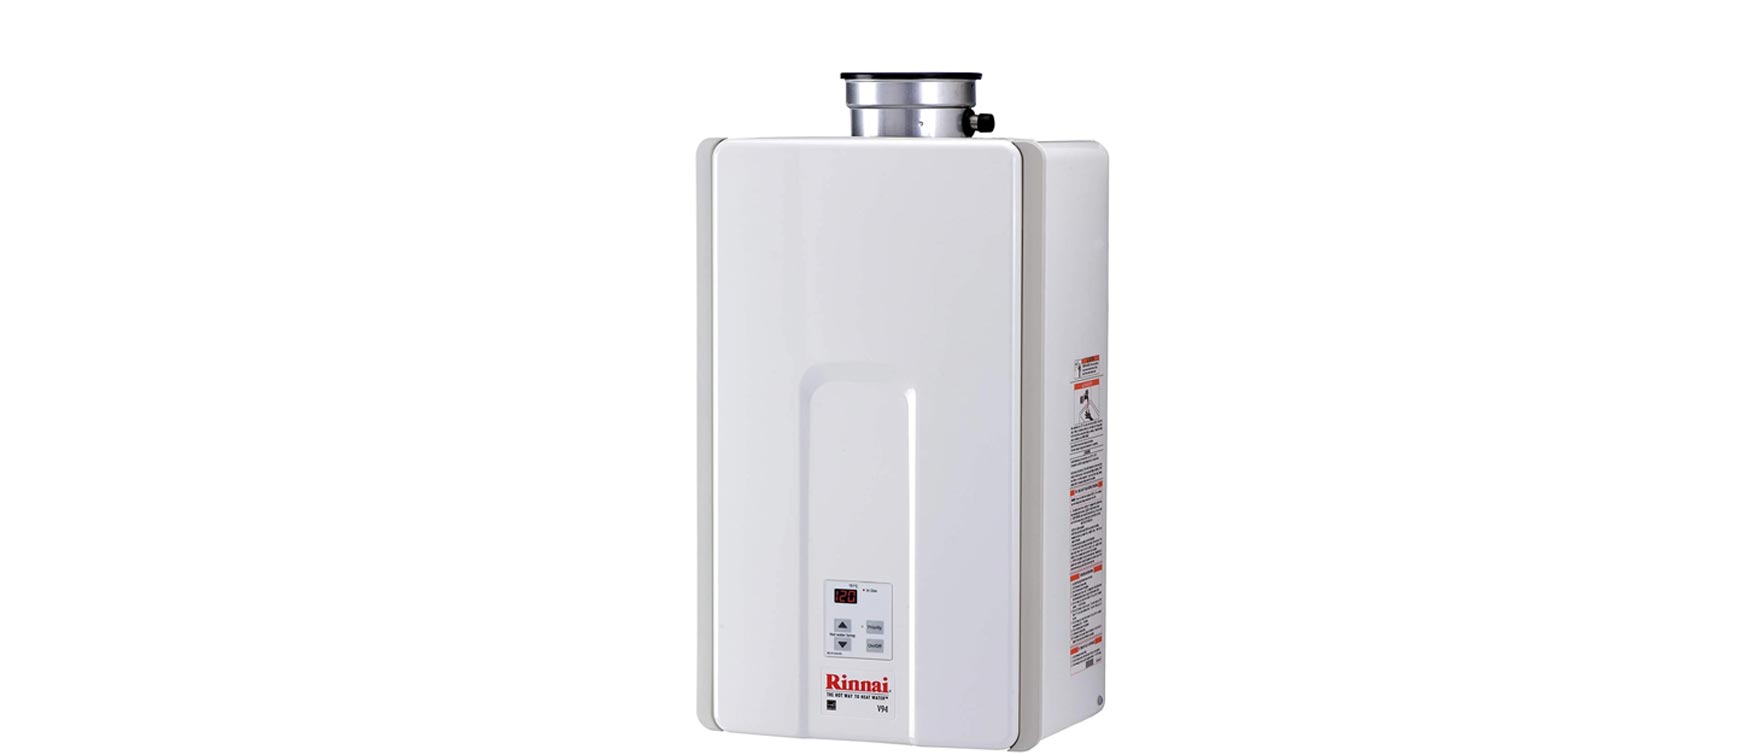 6. Best for Whole House: Rinnai V94iN Natural Gas Tankless Water Heater